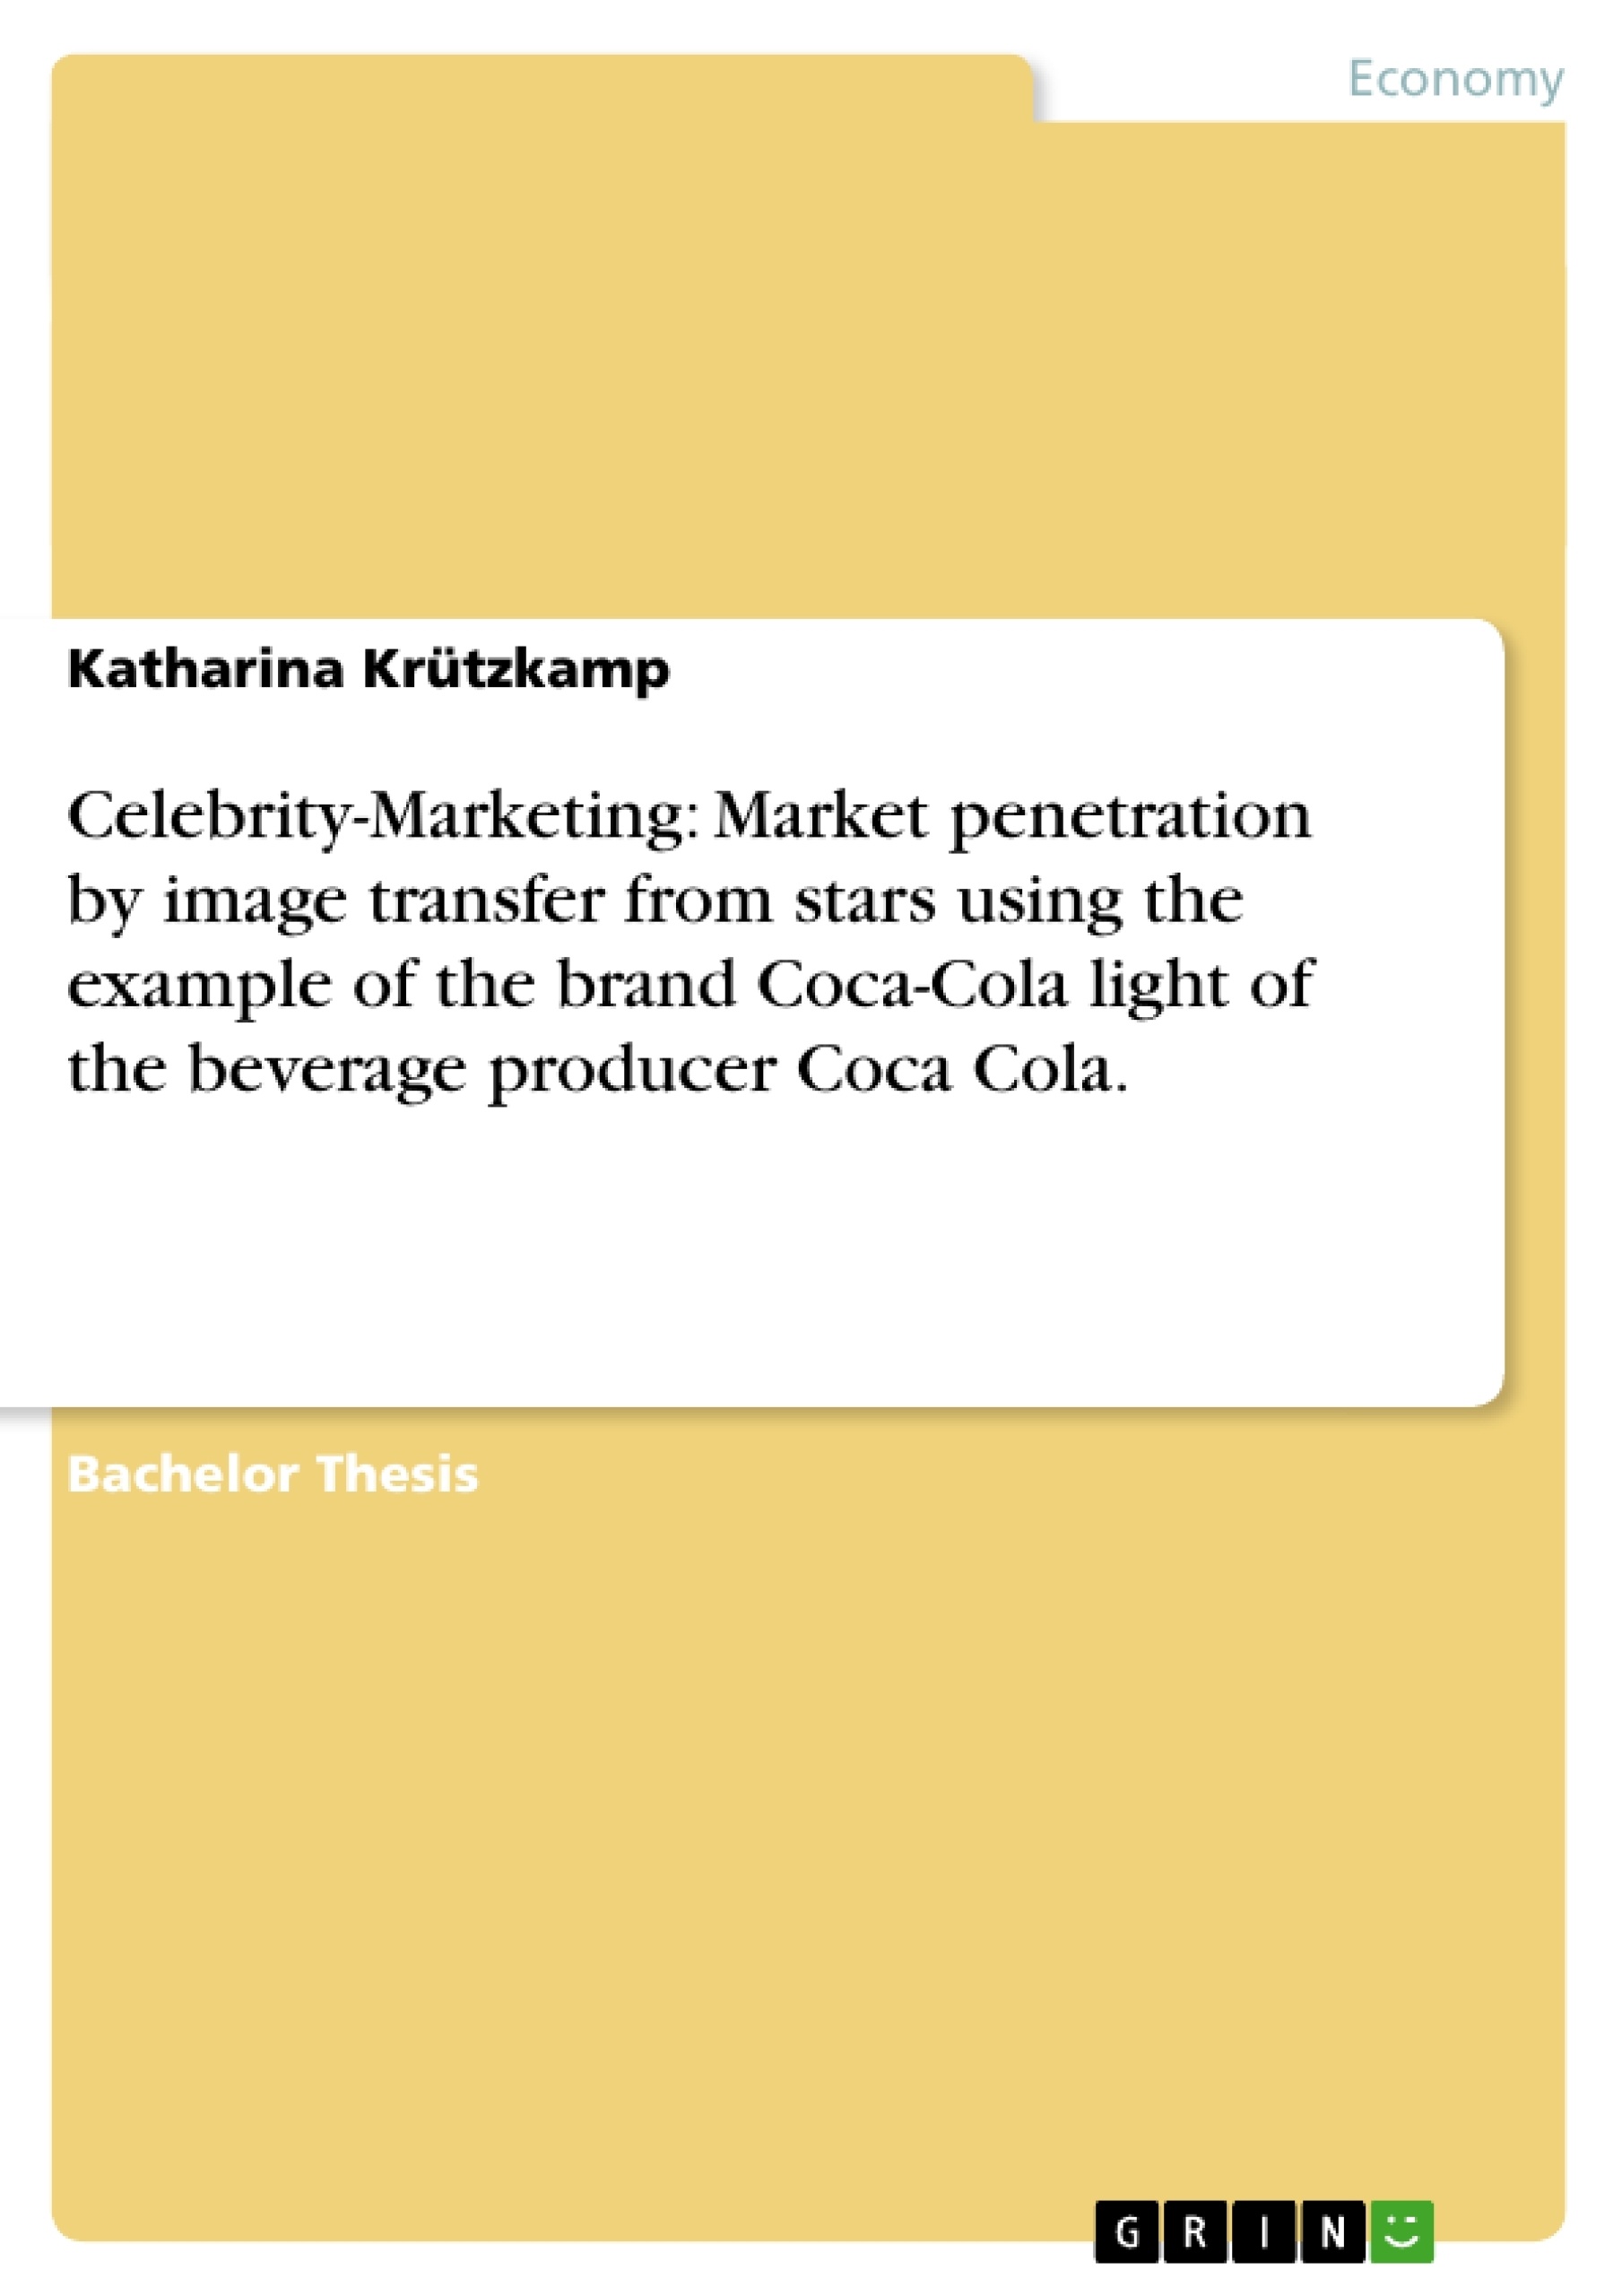 Titre: Celebrity-Marketing: Market penetration by image transfer from stars using the example of the brand Coca-Cola light of the beverage producer Coca Cola.